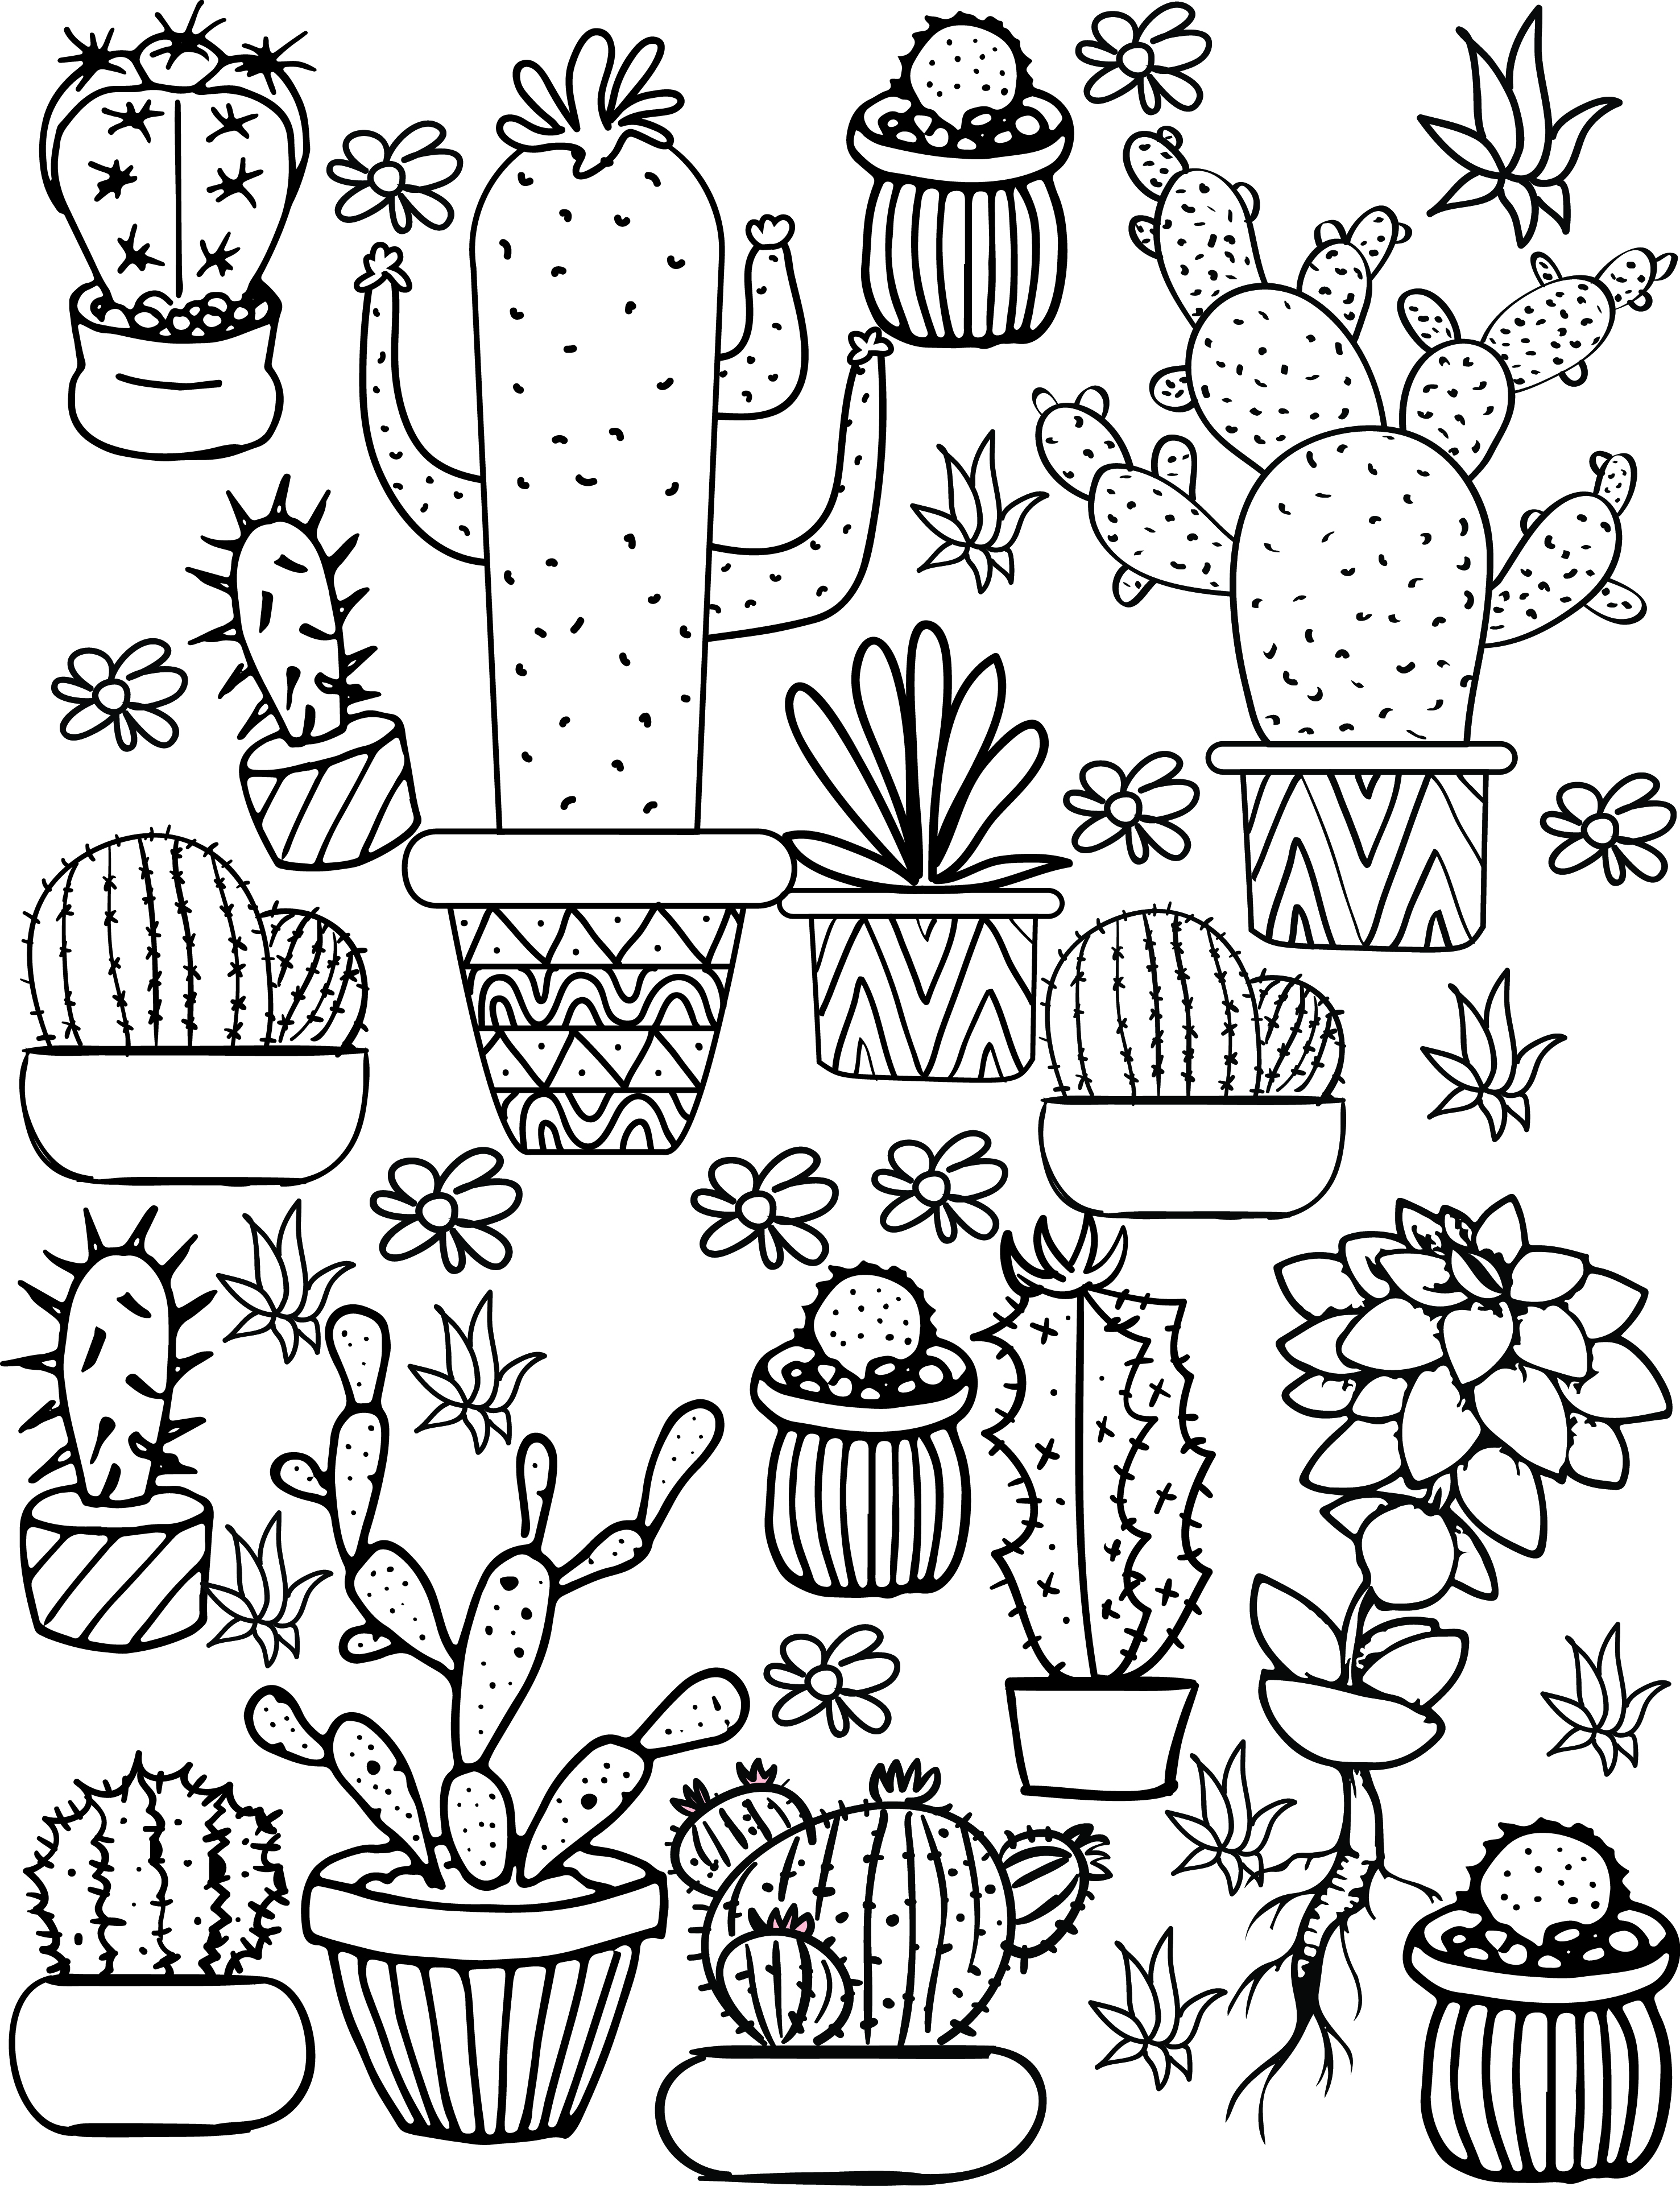 Cactus and Succulent Printable Adult Coloring Pages